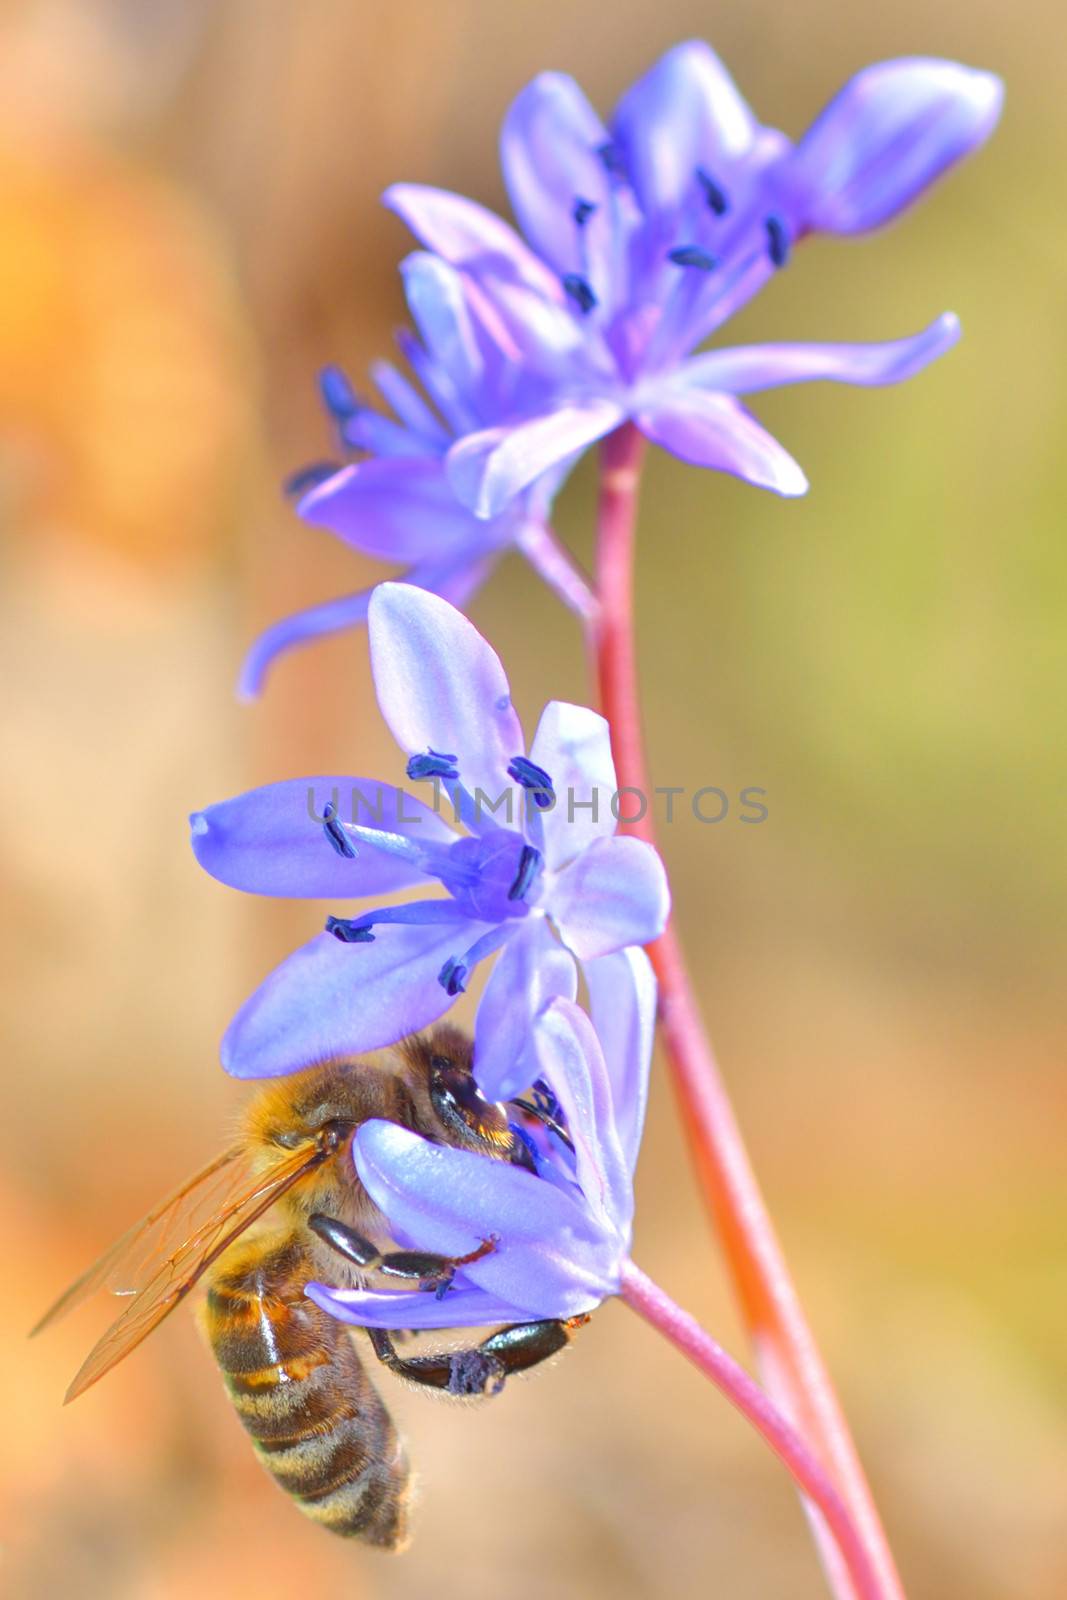 Image of beautiful violet flower and bee by mady70